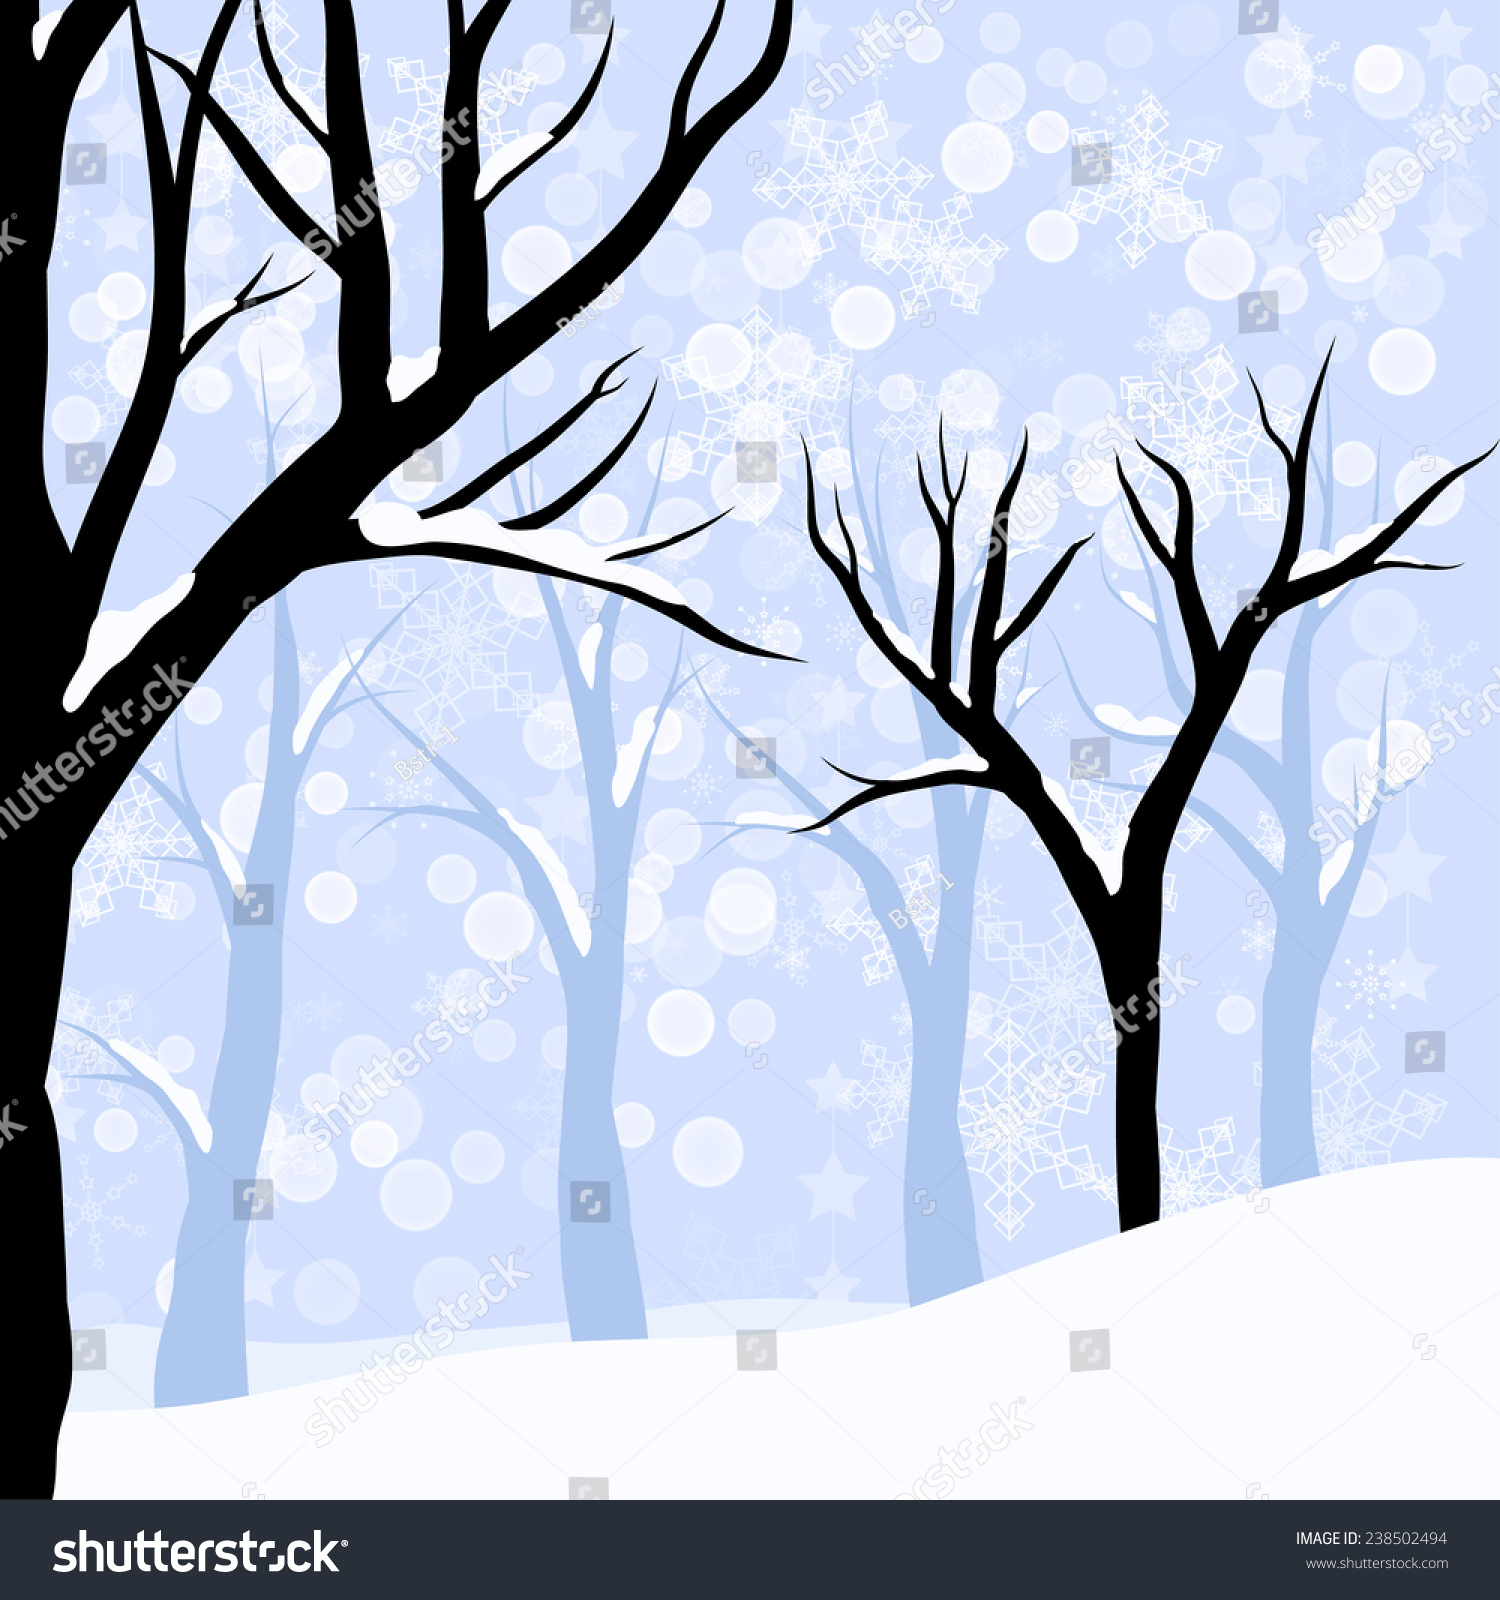 Photo of bare trees and snow